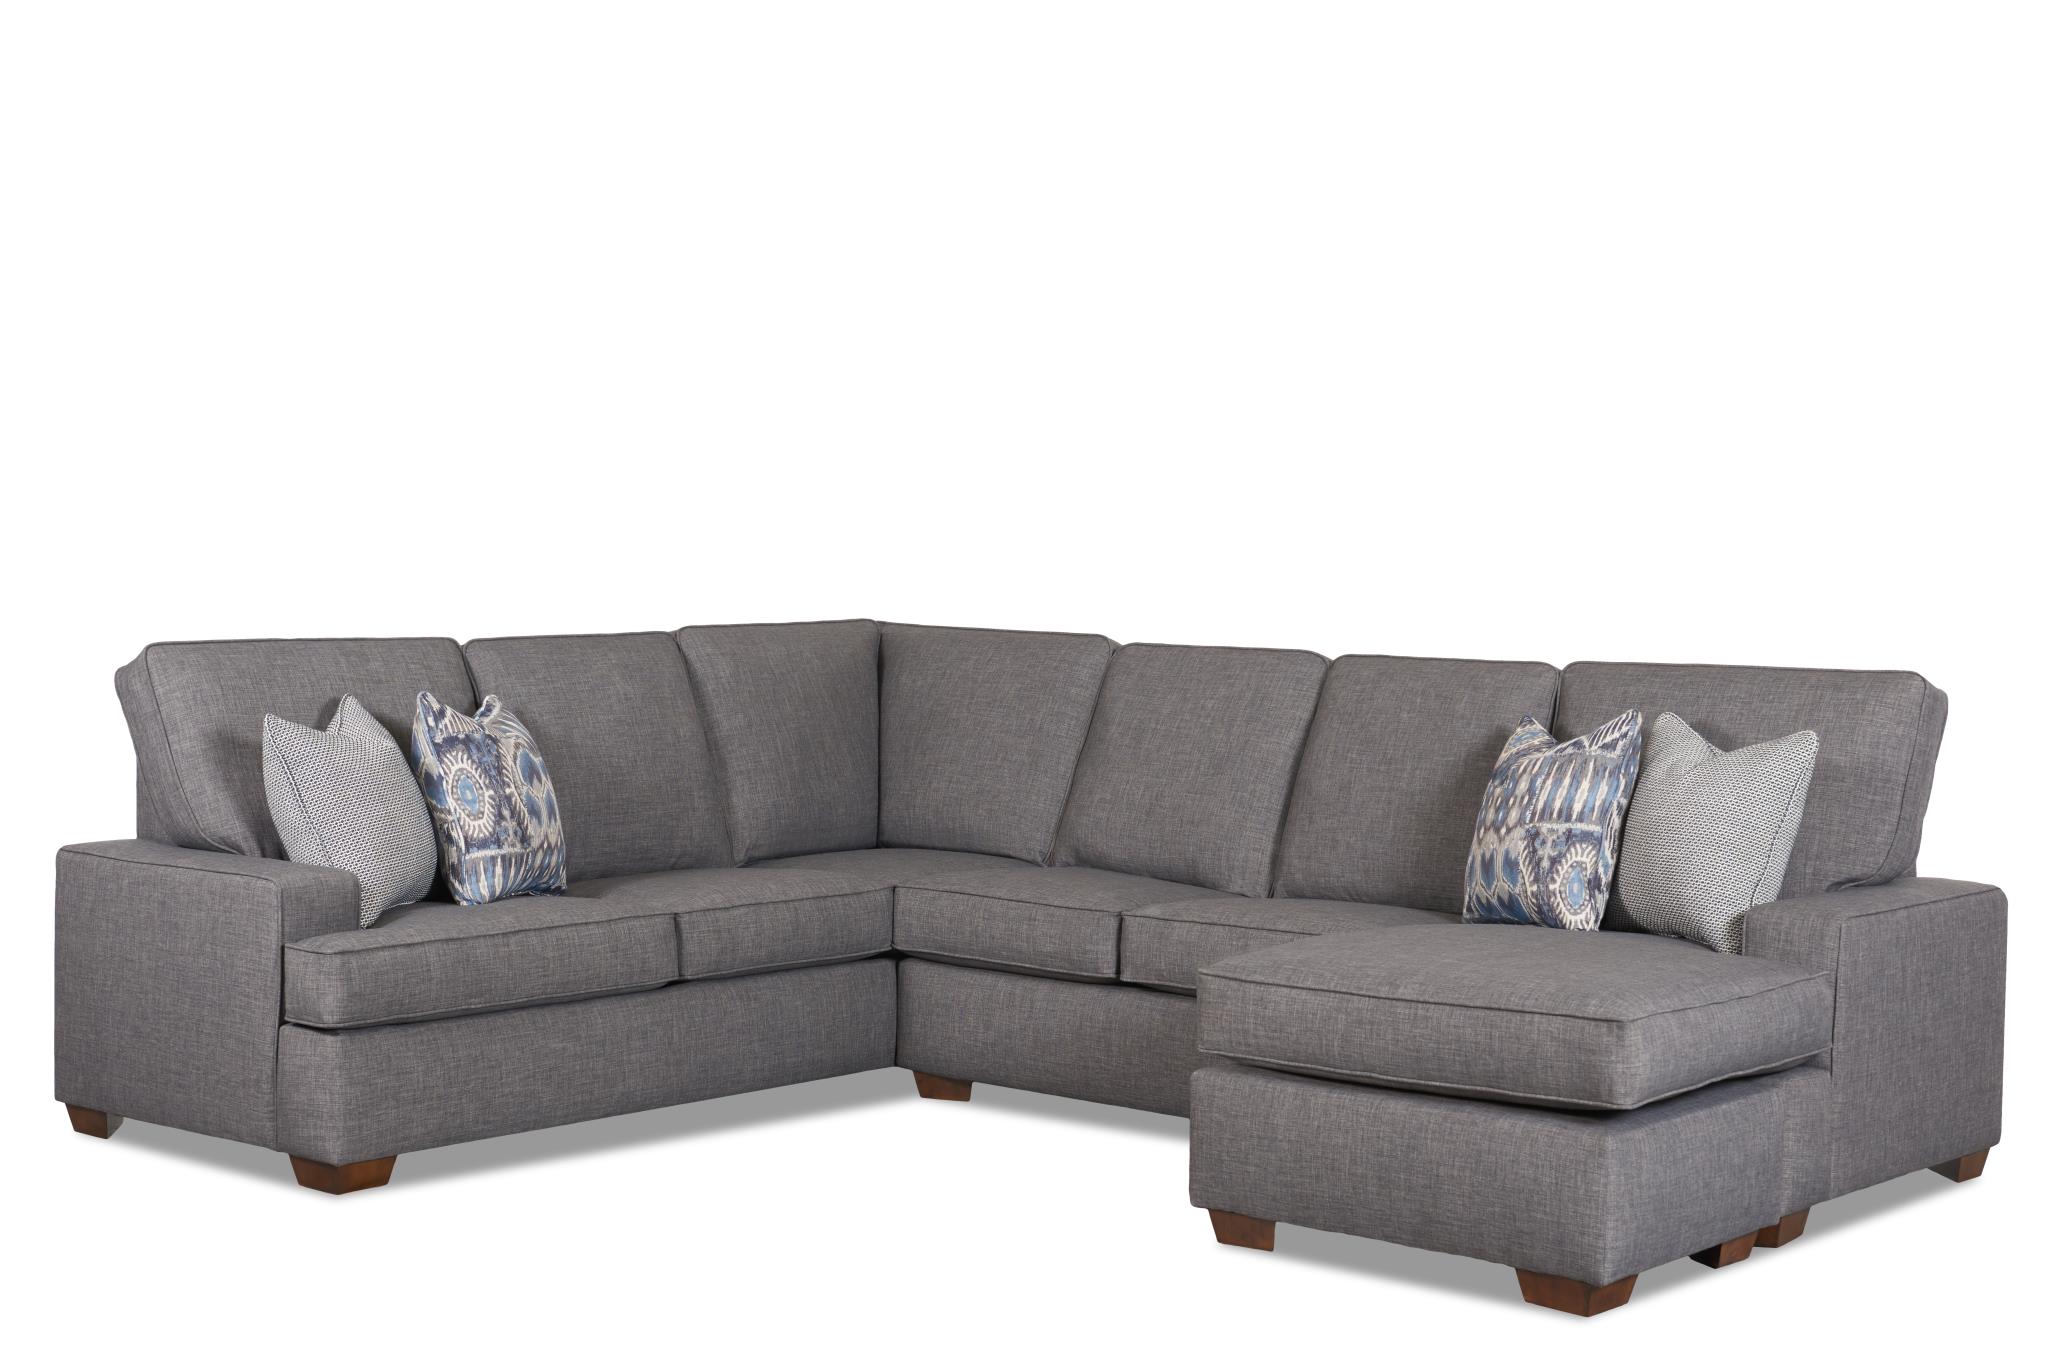 Fairview Sectional Sofa Bennett Charcoal by Wood House Upholstery